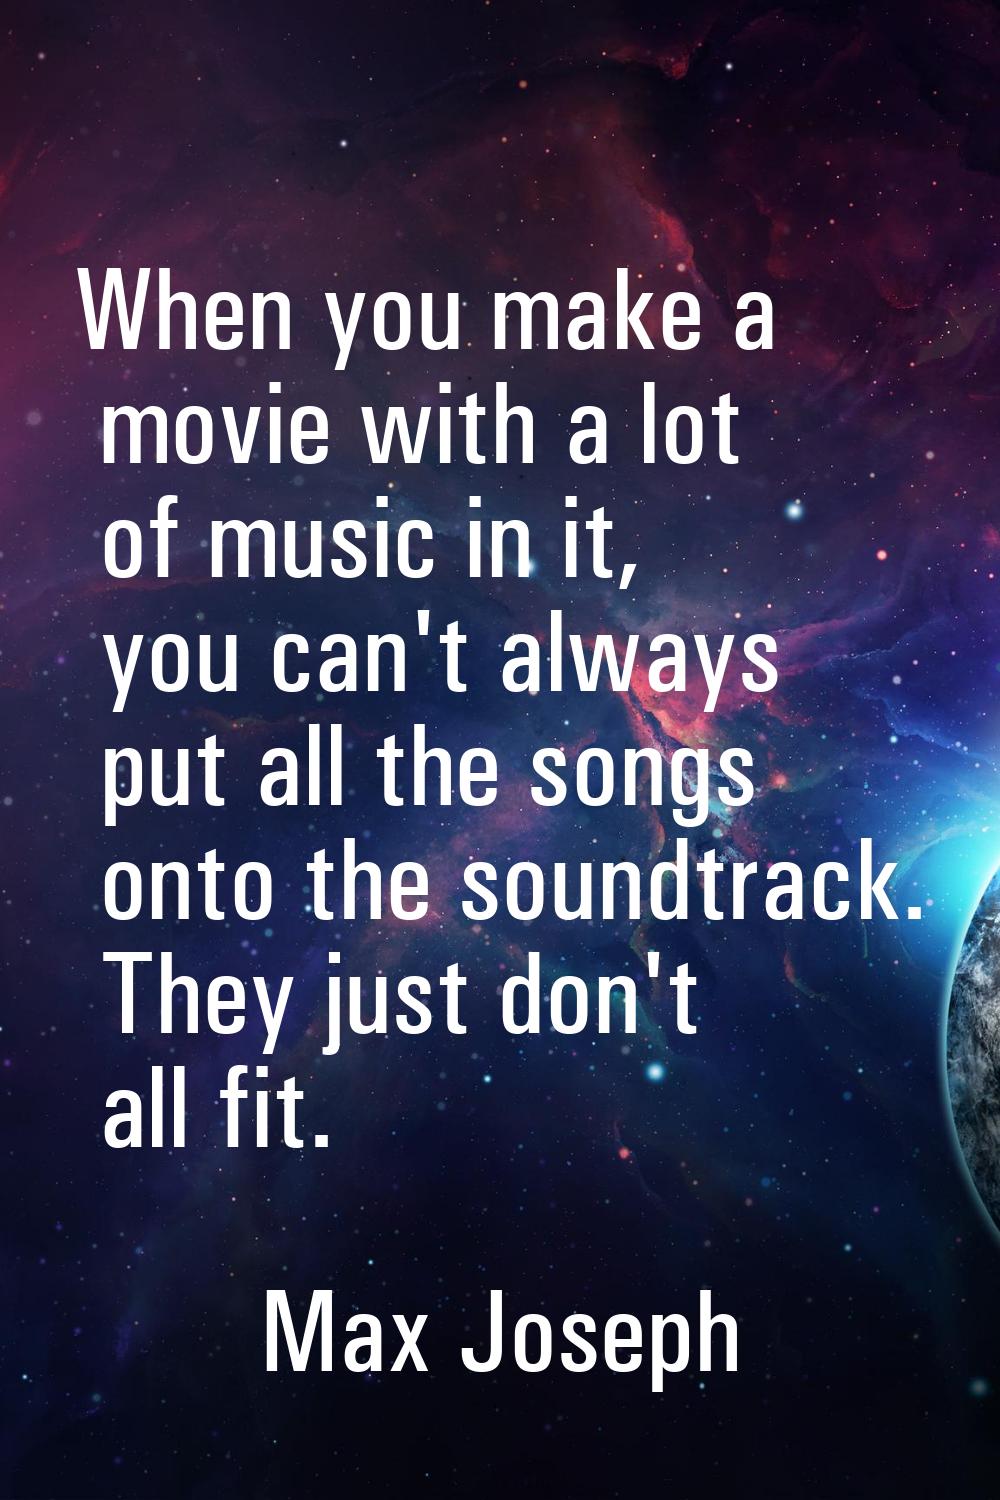 When you make a movie with a lot of music in it, you can't always put all the songs onto the soundt